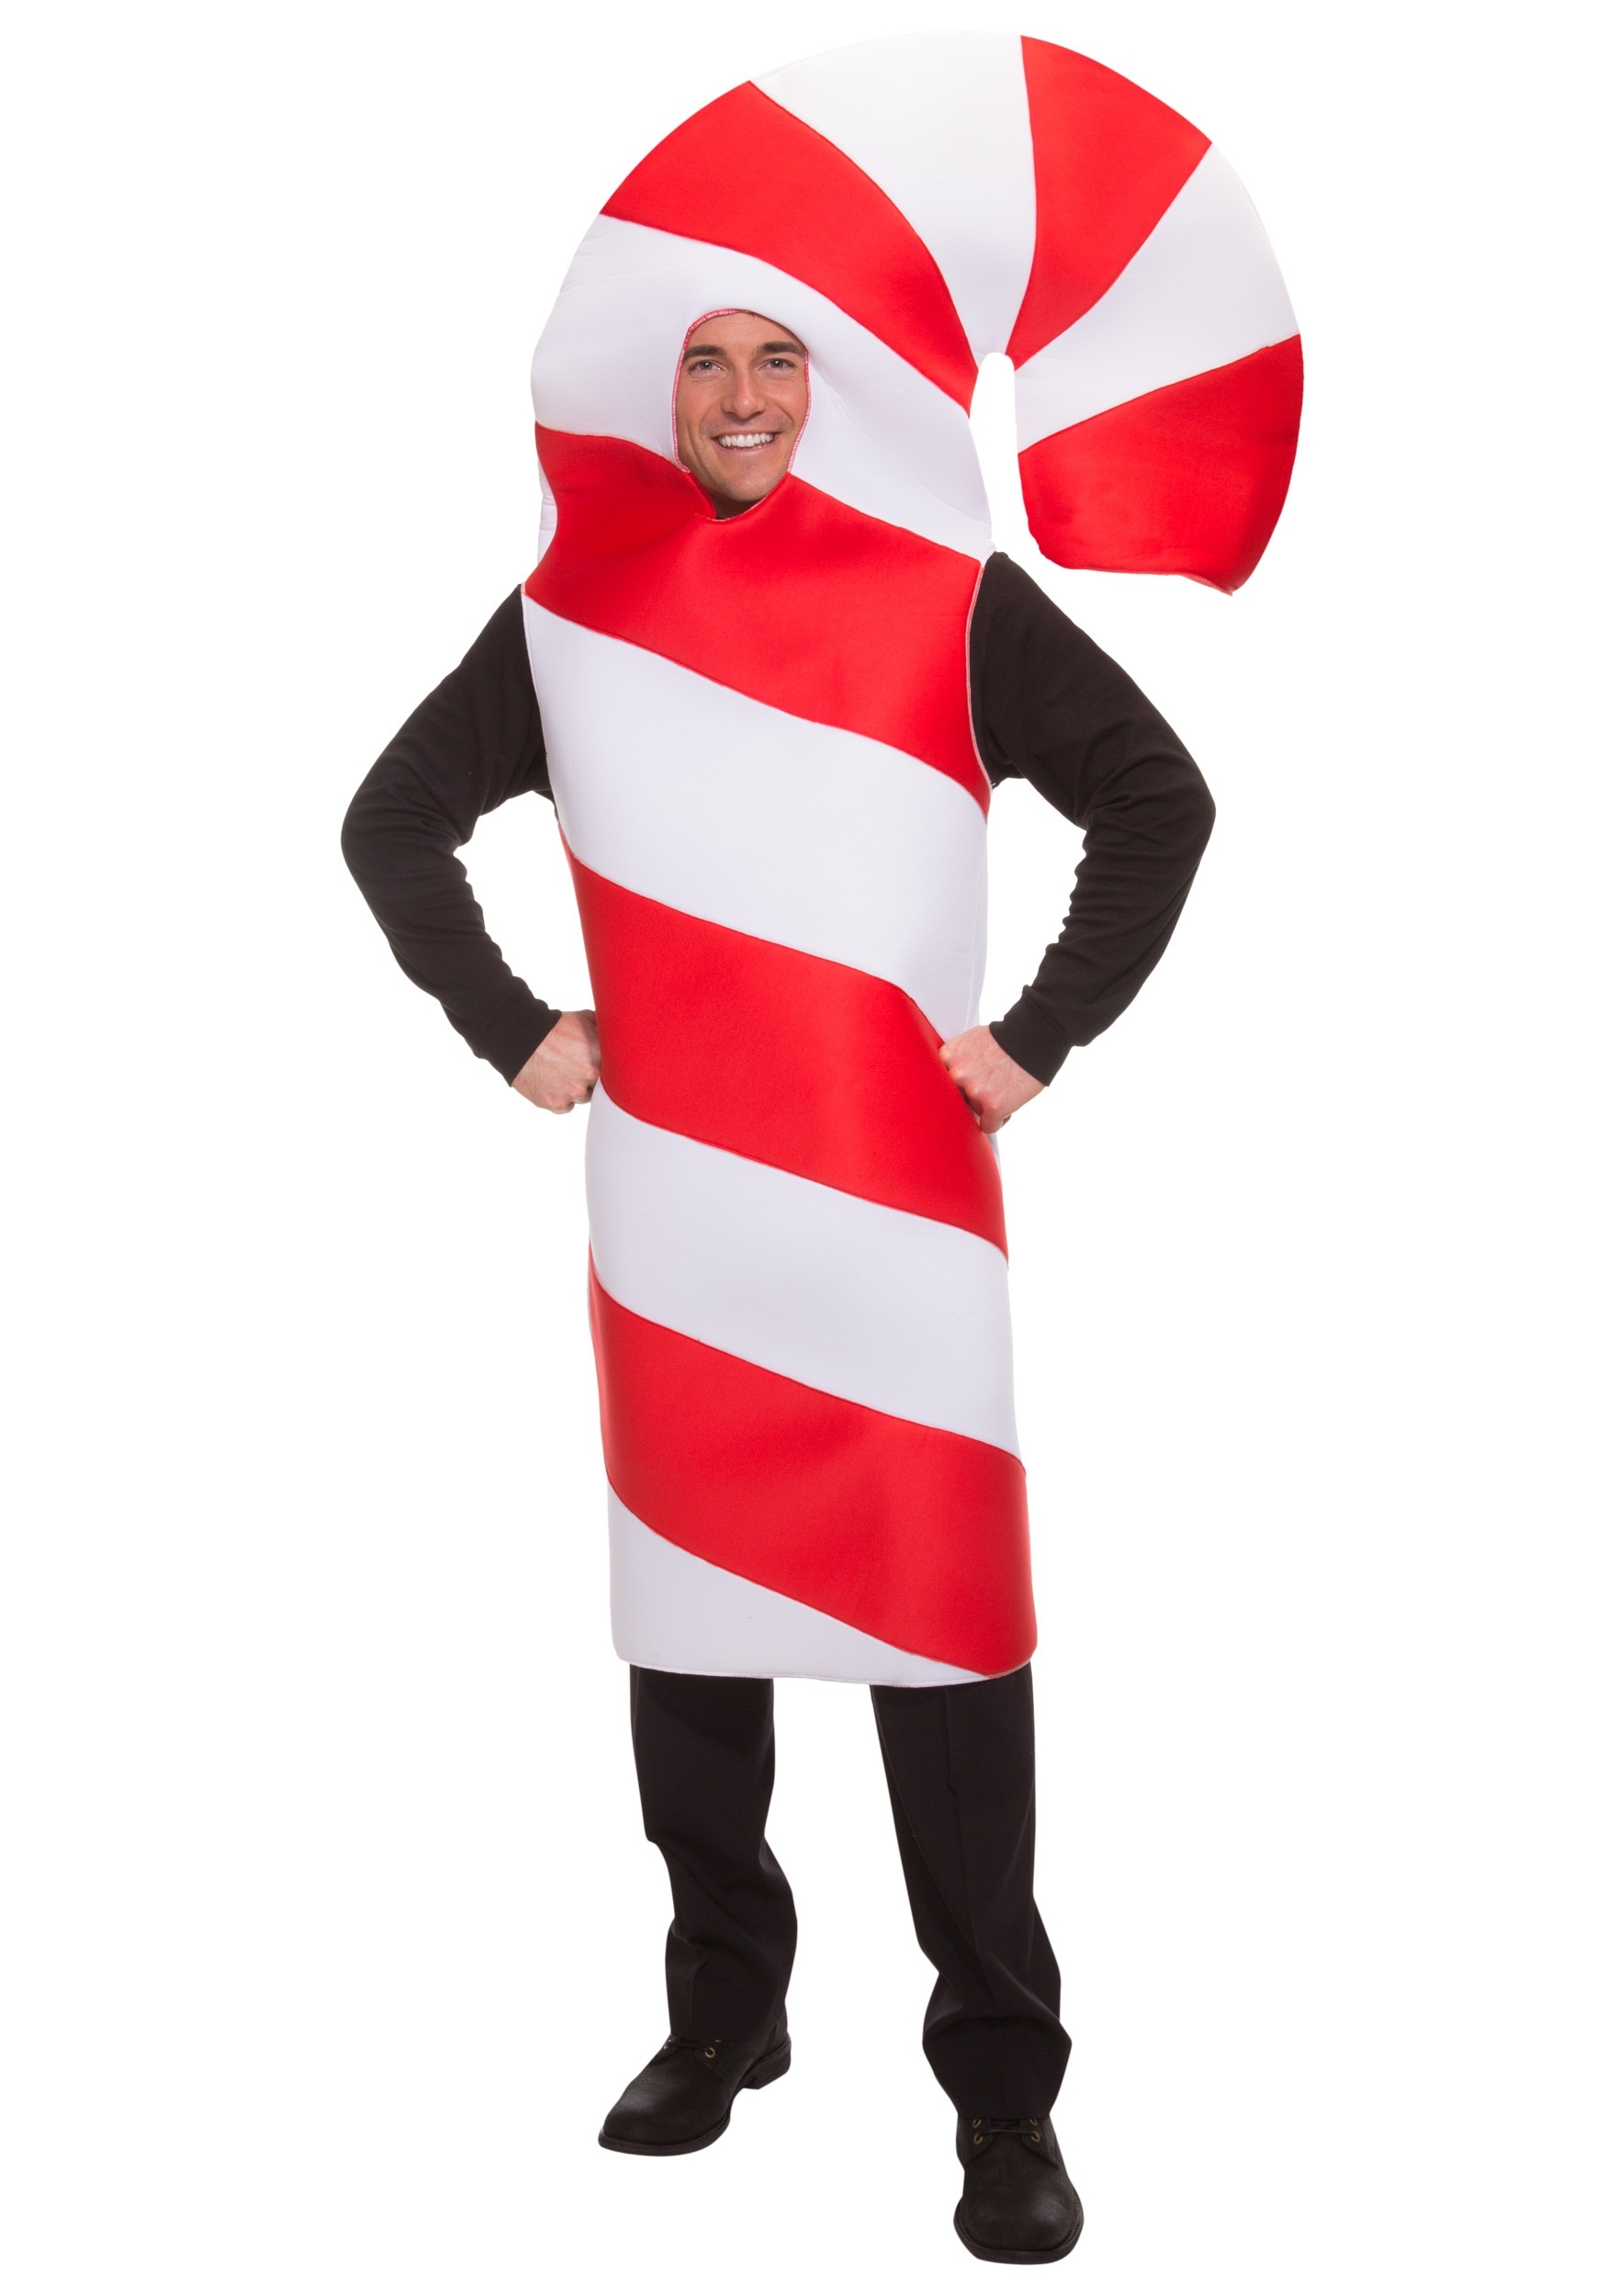 Photos - Fancy Dress Candy FUN Costumes  Cane Adult Plus Size Costume Red/White FUN2679PL 